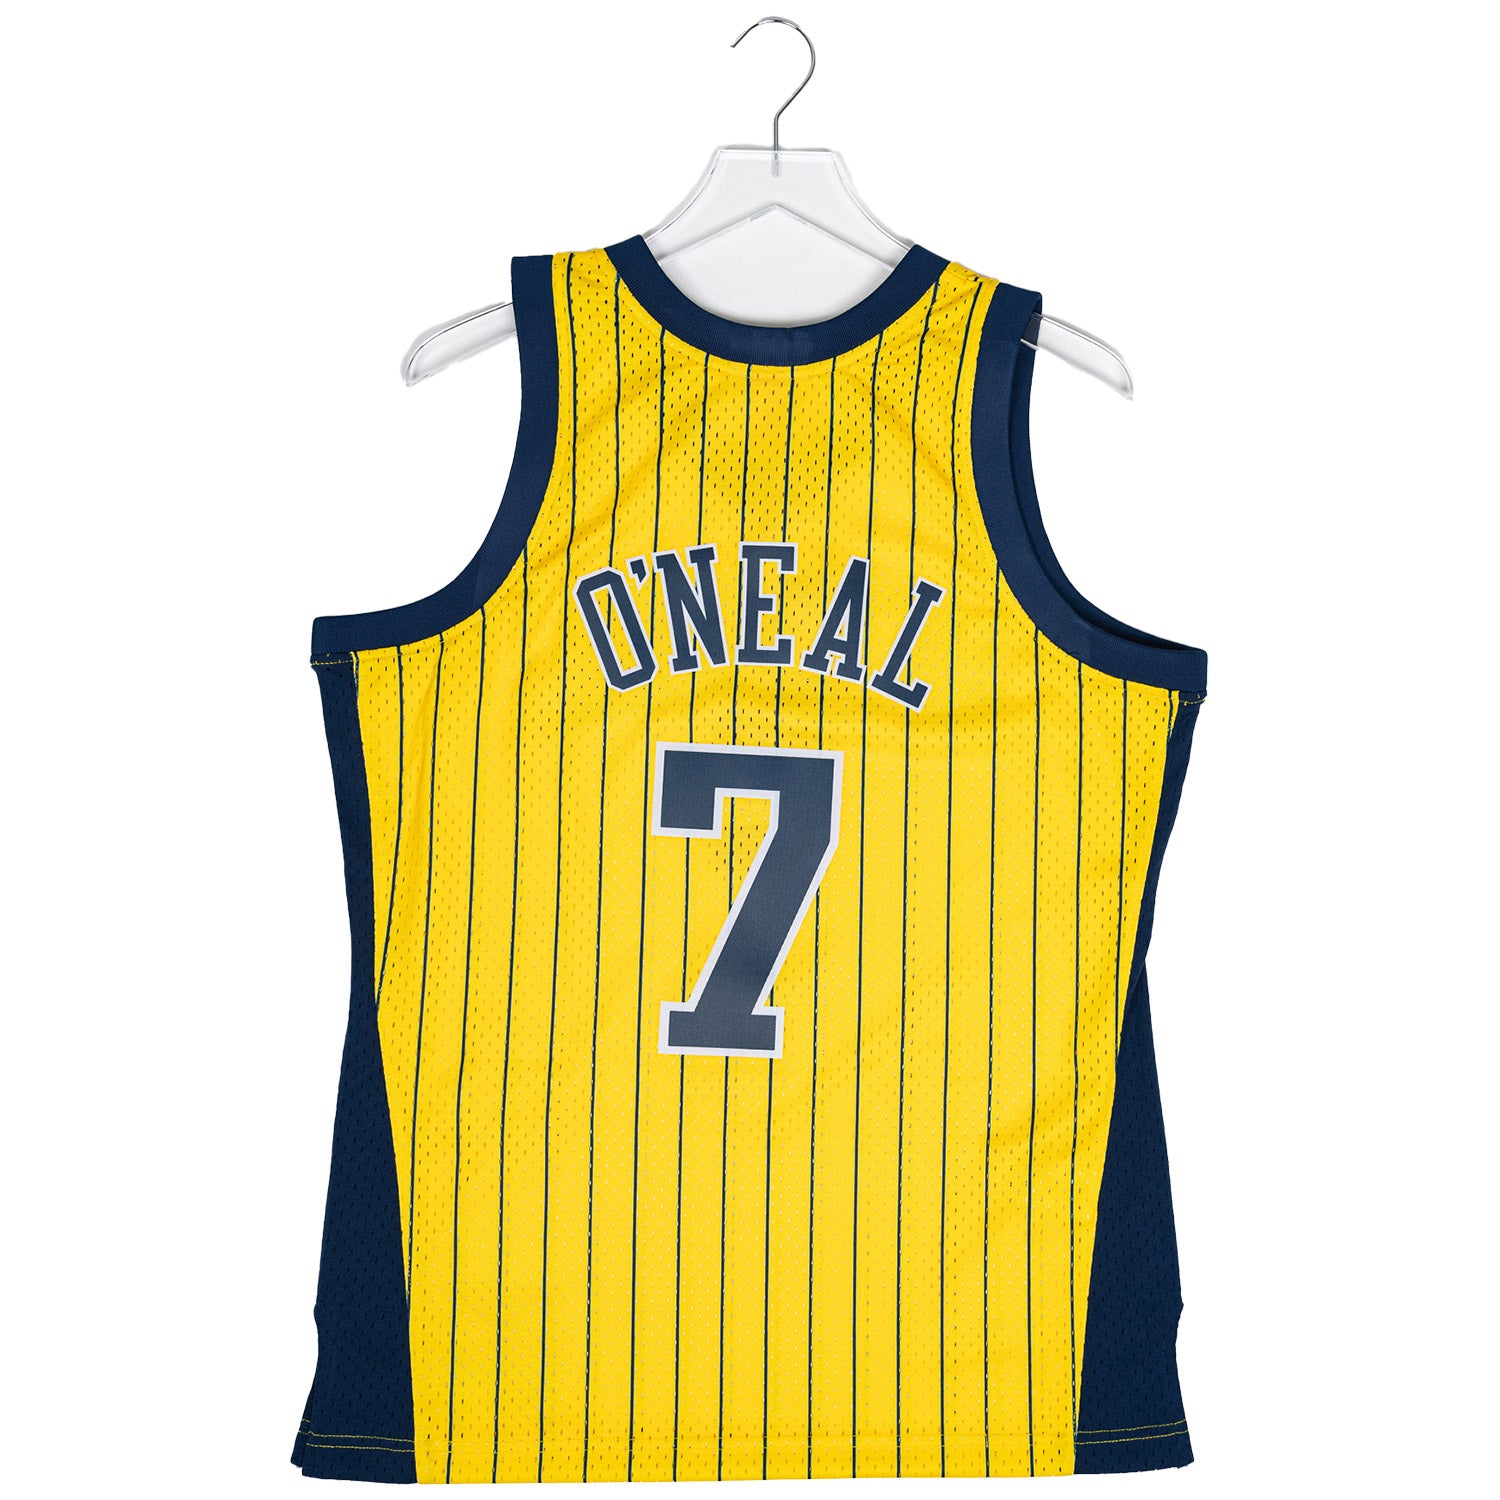 Indiana Pacers Home Uniform  Indiana pacers, Best basketball jersey design,  Indiana